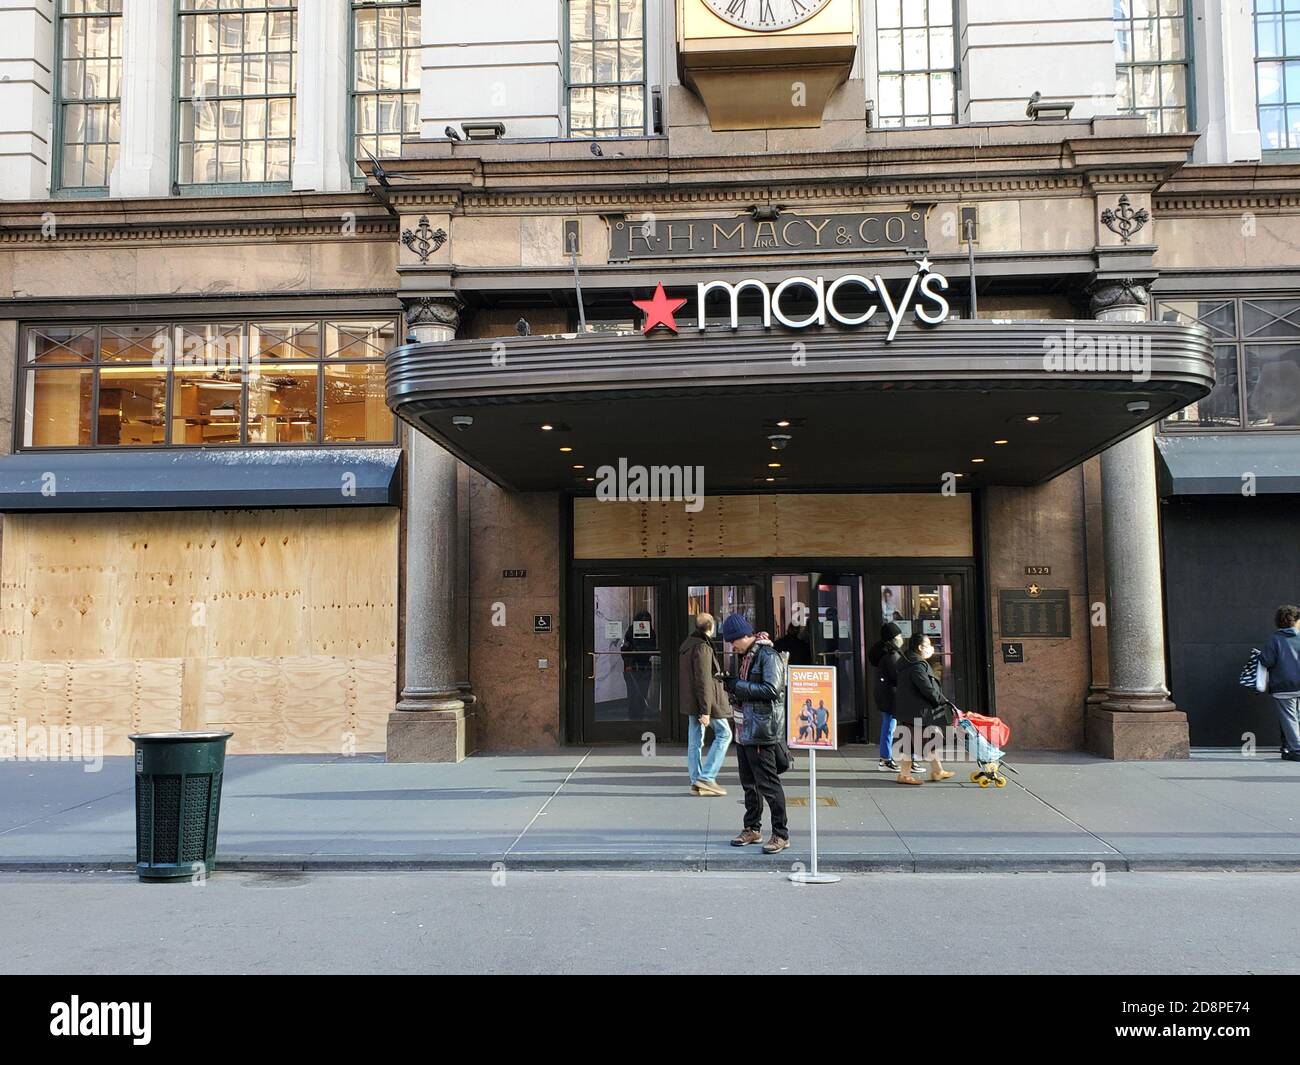 October 31, 2020, New York, New York, USA: Macy's Flagship store in Manhattan boarded up there windows in anticipation of protests before the November 3,2020.elections also other storefronts  and Fox News boarded up there front of the building. (Credit Image: © Bruce Cotler/ZUMA Wire) Stock Photo